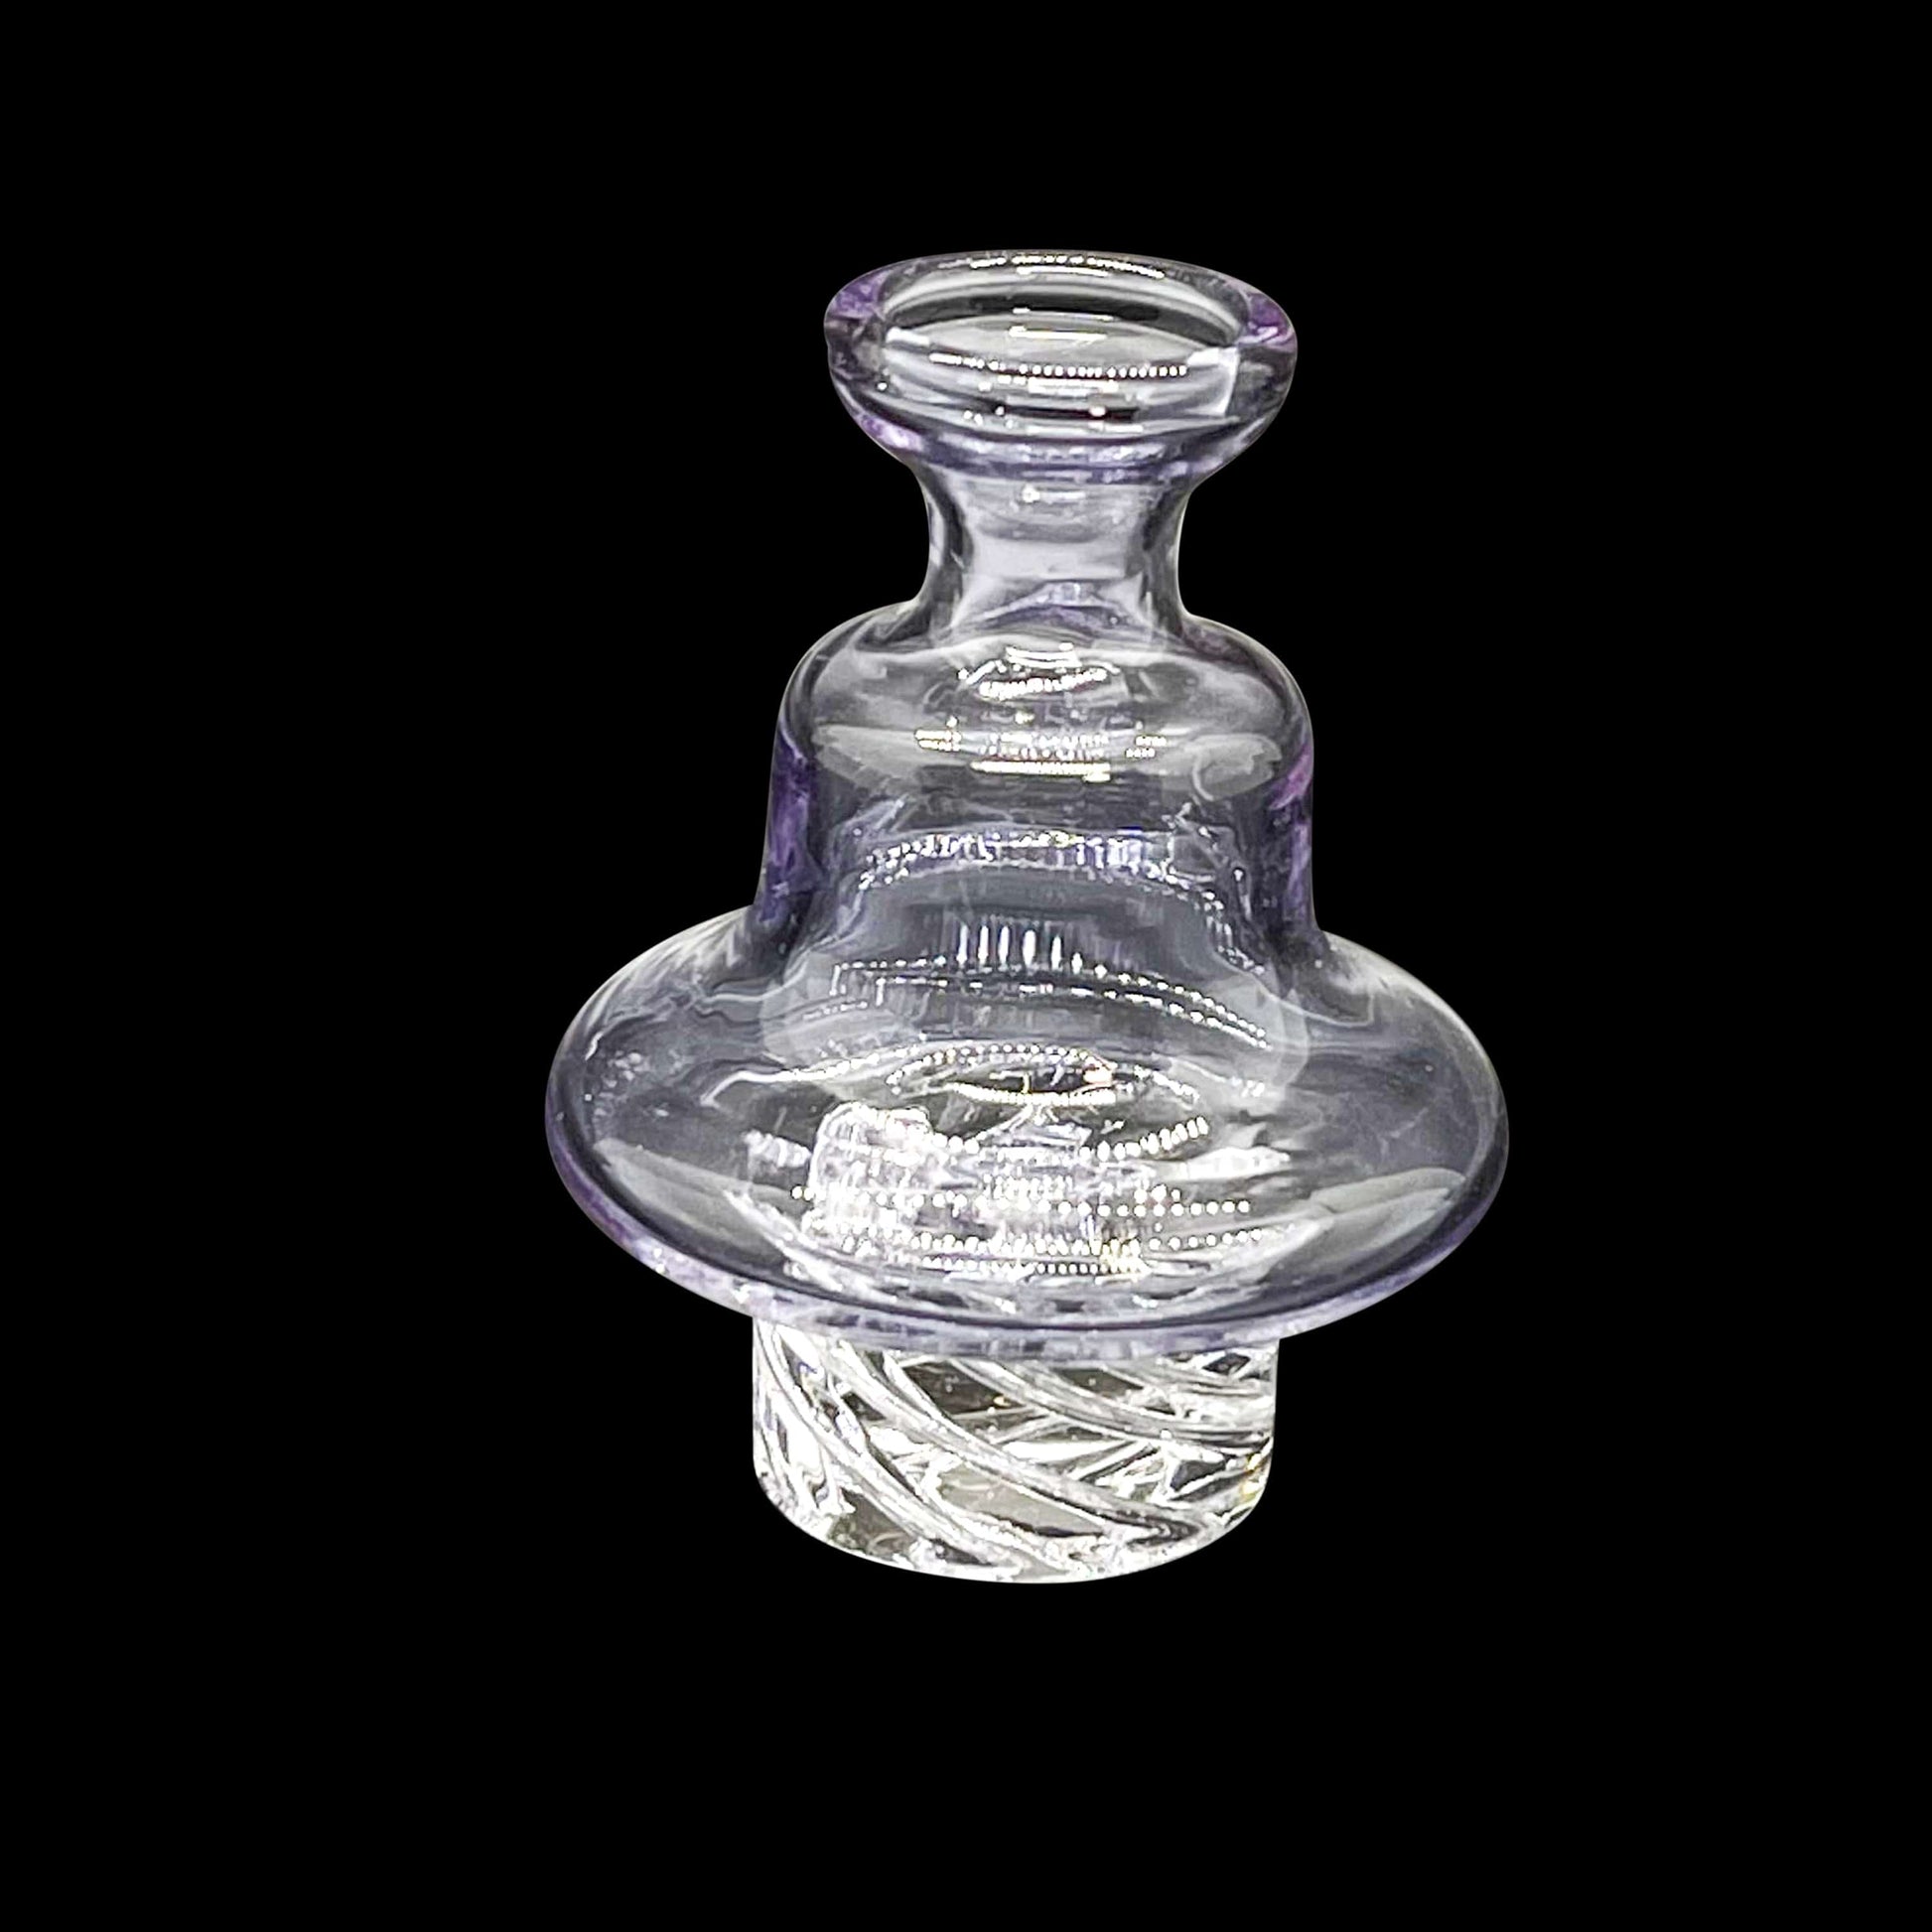 On Point Smoke - Clear Purple Riptide V2 Spinning Carb Cap for 25mm Quartz Bangers - OPS.com